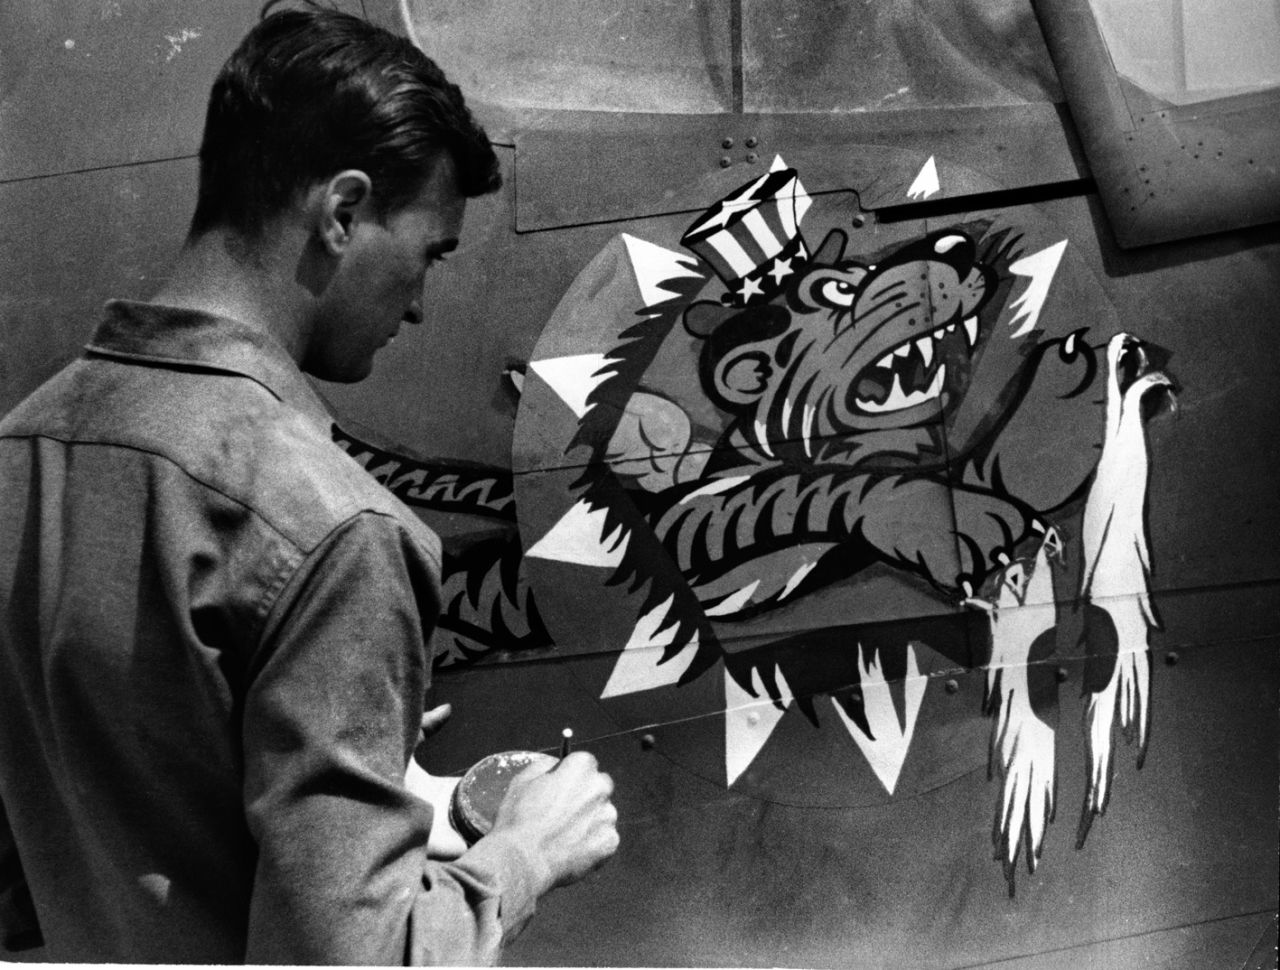 An artist of the China Air Task Force Fighter Command of the United States Army Air Force puts the finishing touches on the insignia of a U.S. plane. The pilots were known as "Flying Tigers."  